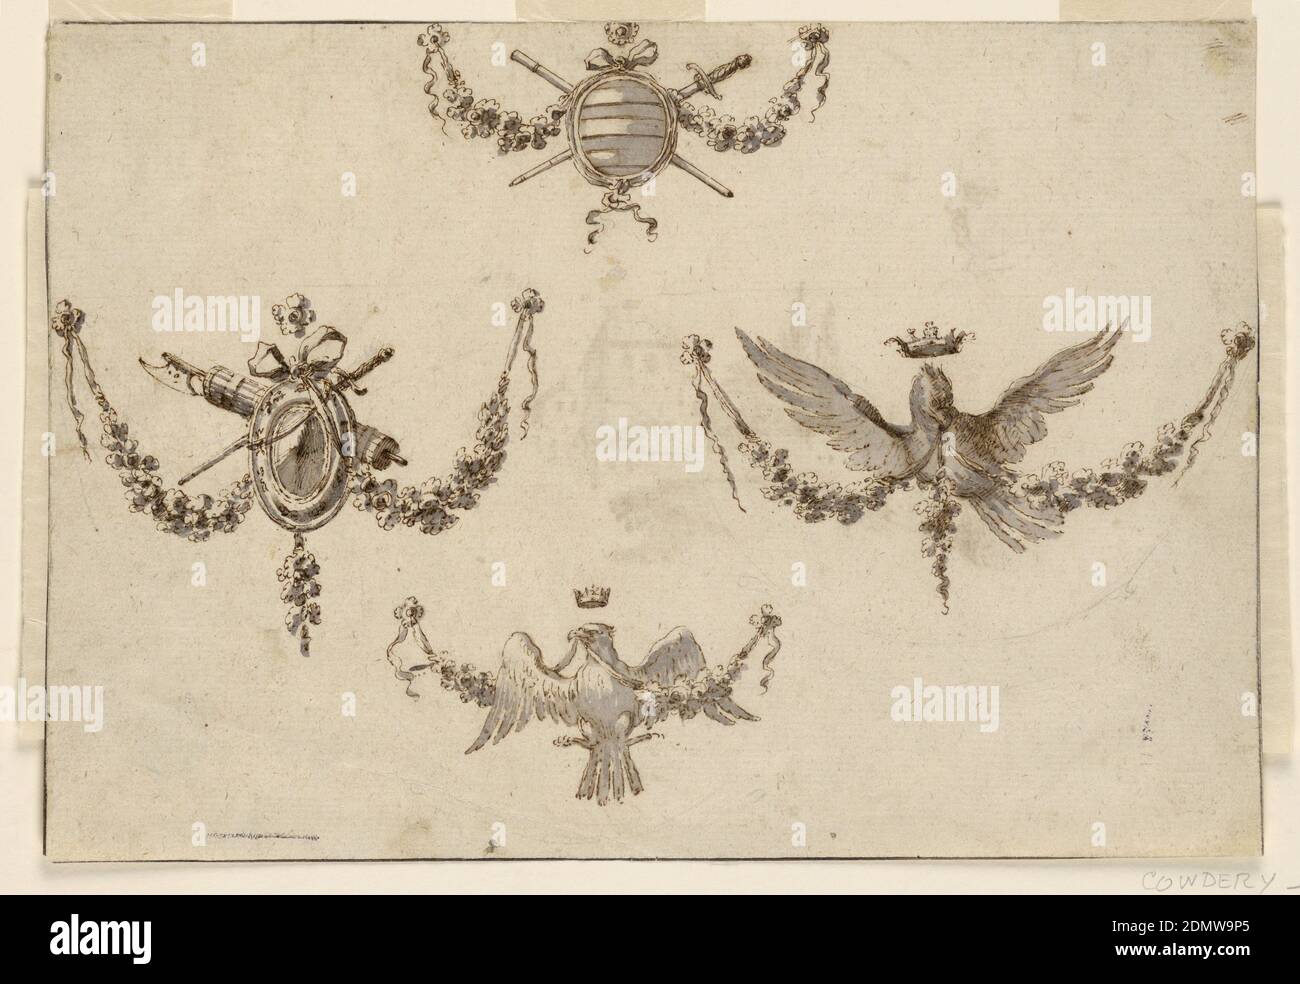 Design for Four Festoons, Pen and brown ink, brush and grey wash, graphite framing lines on cream laid paper, Horizontal rectangle showing design for four festoons. At top, a shield with crossed swords; at center left, a fasces and shield; at center right, a resplendent crowned eagle; at bottom, a perched crowned eagle. Verso, in pen and ink: the top of a hill and garden., Italy, ca. 1780, ornament, Drawing Stock Photo